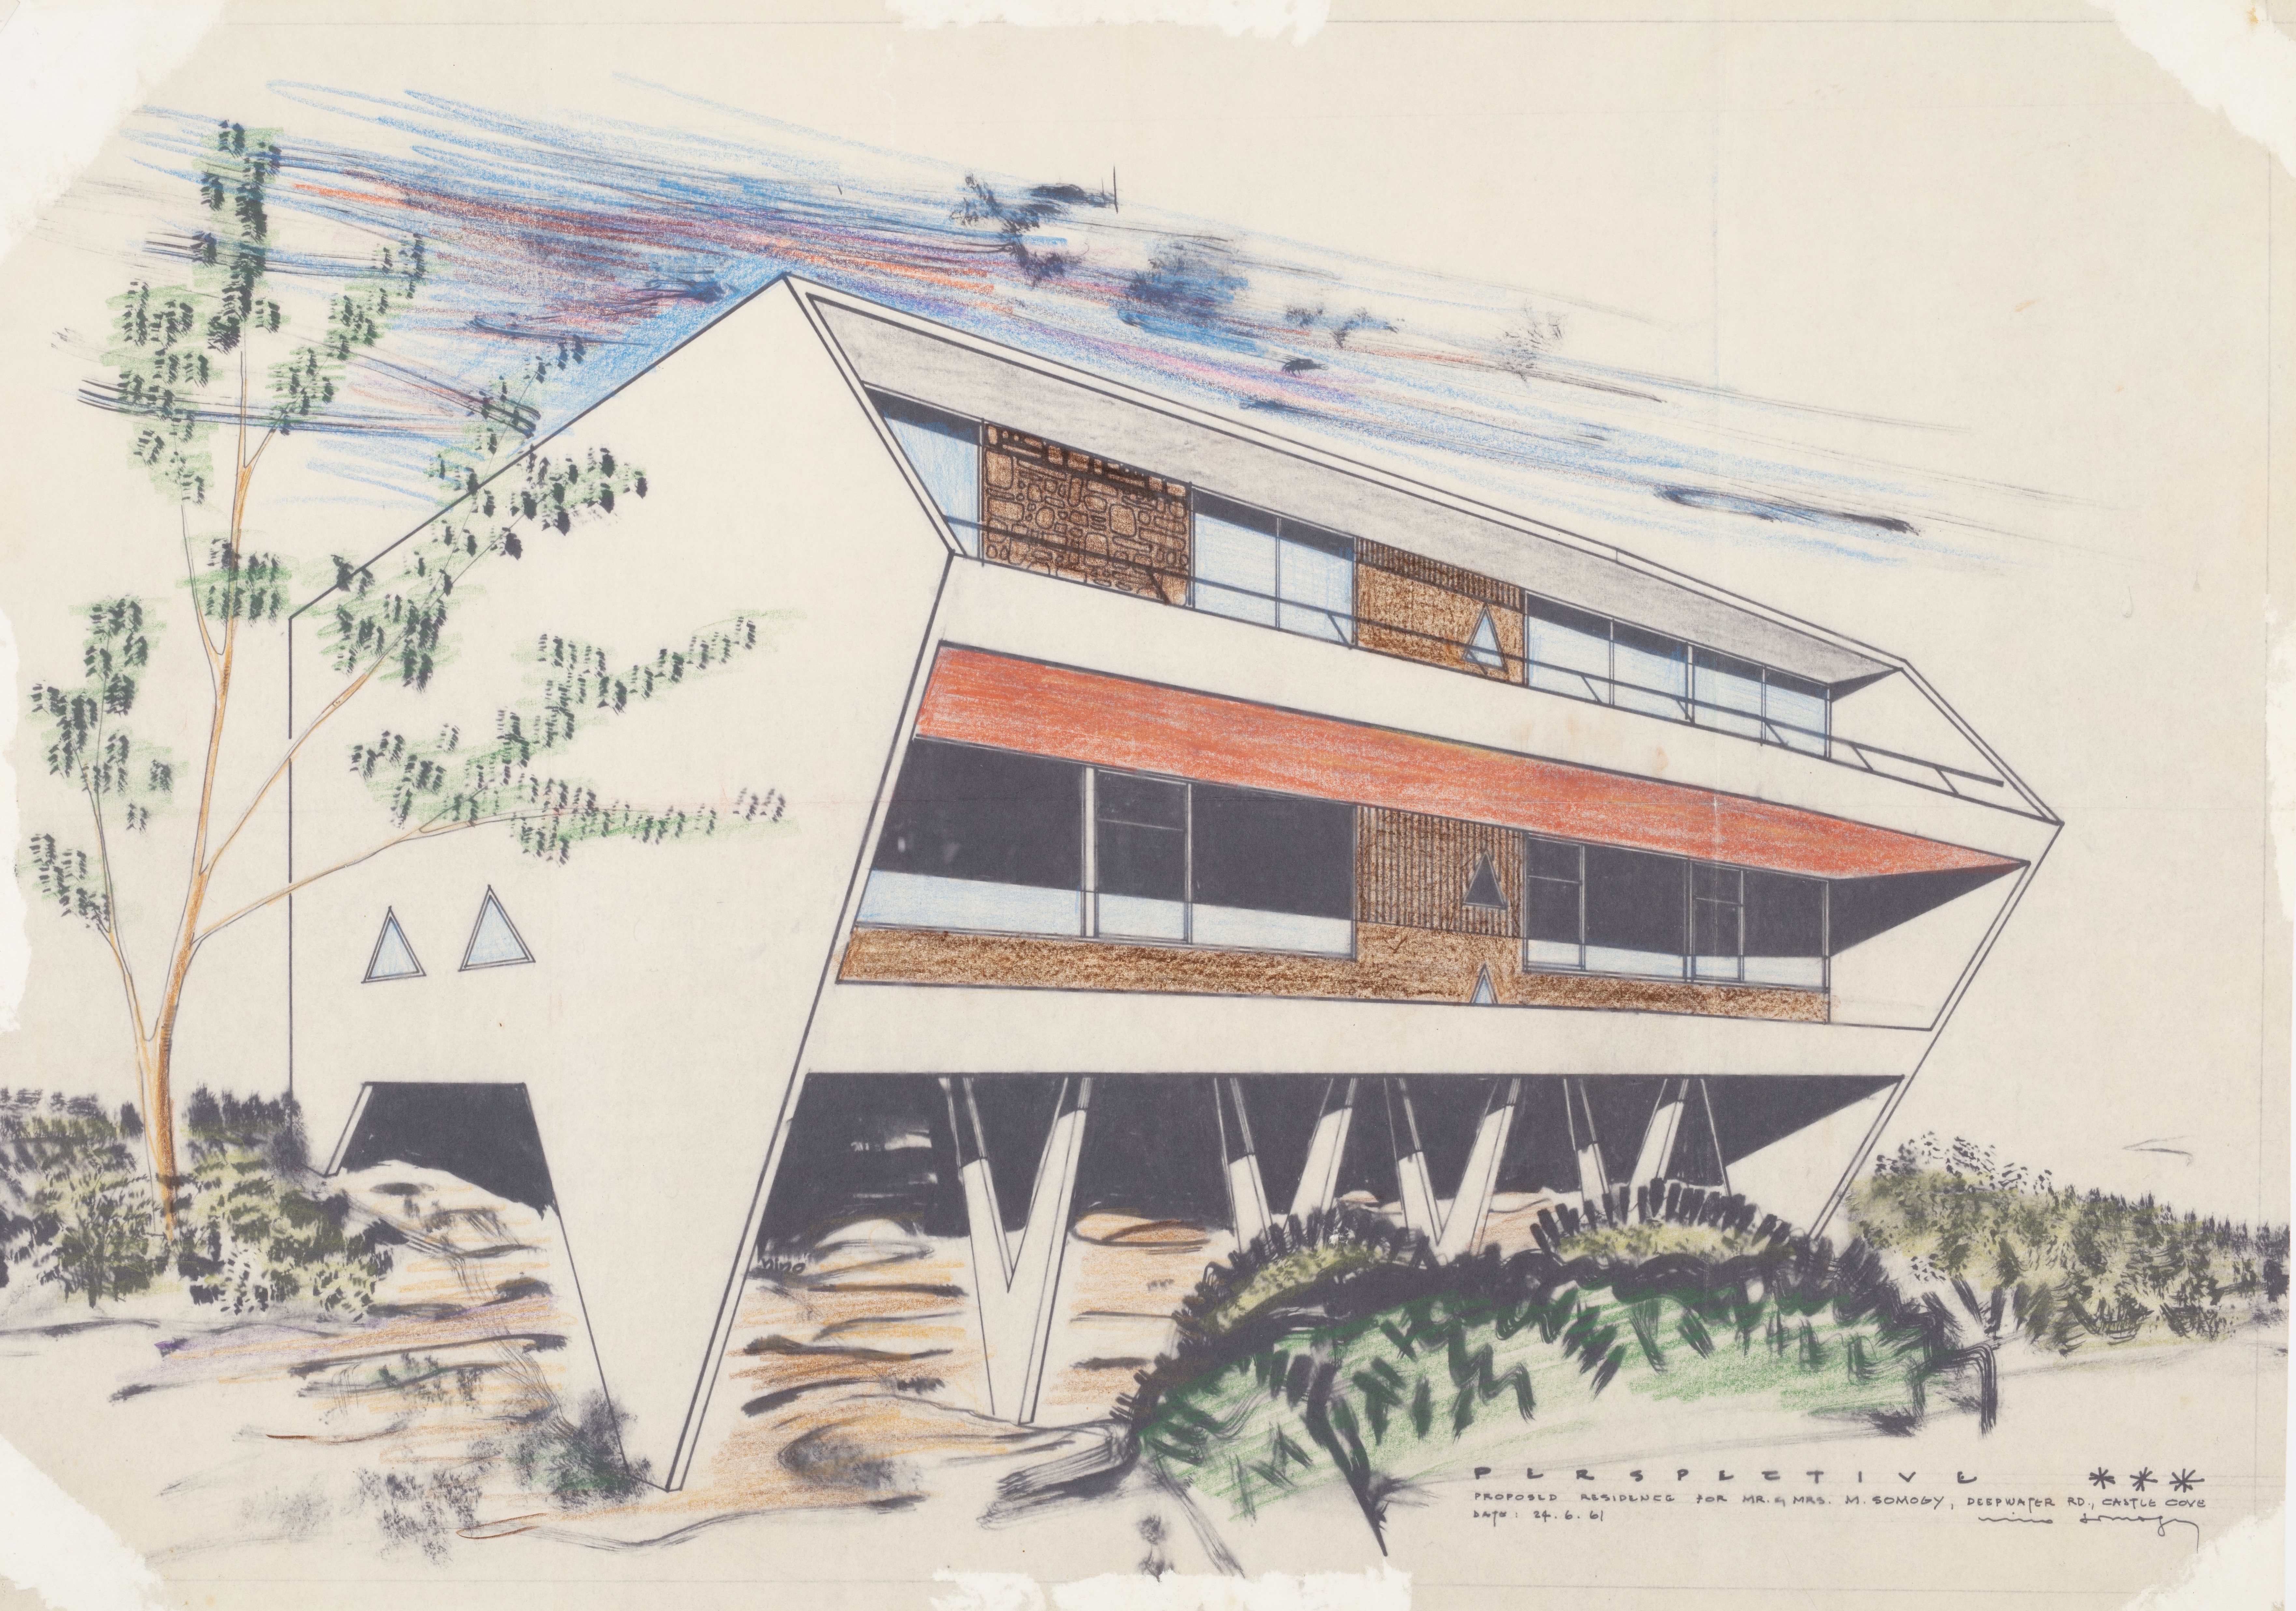 Proposed residence for Mr and Mrs M Somogy, Deepwater Road, Castle Cove, designed by Nino Sydney, 1961